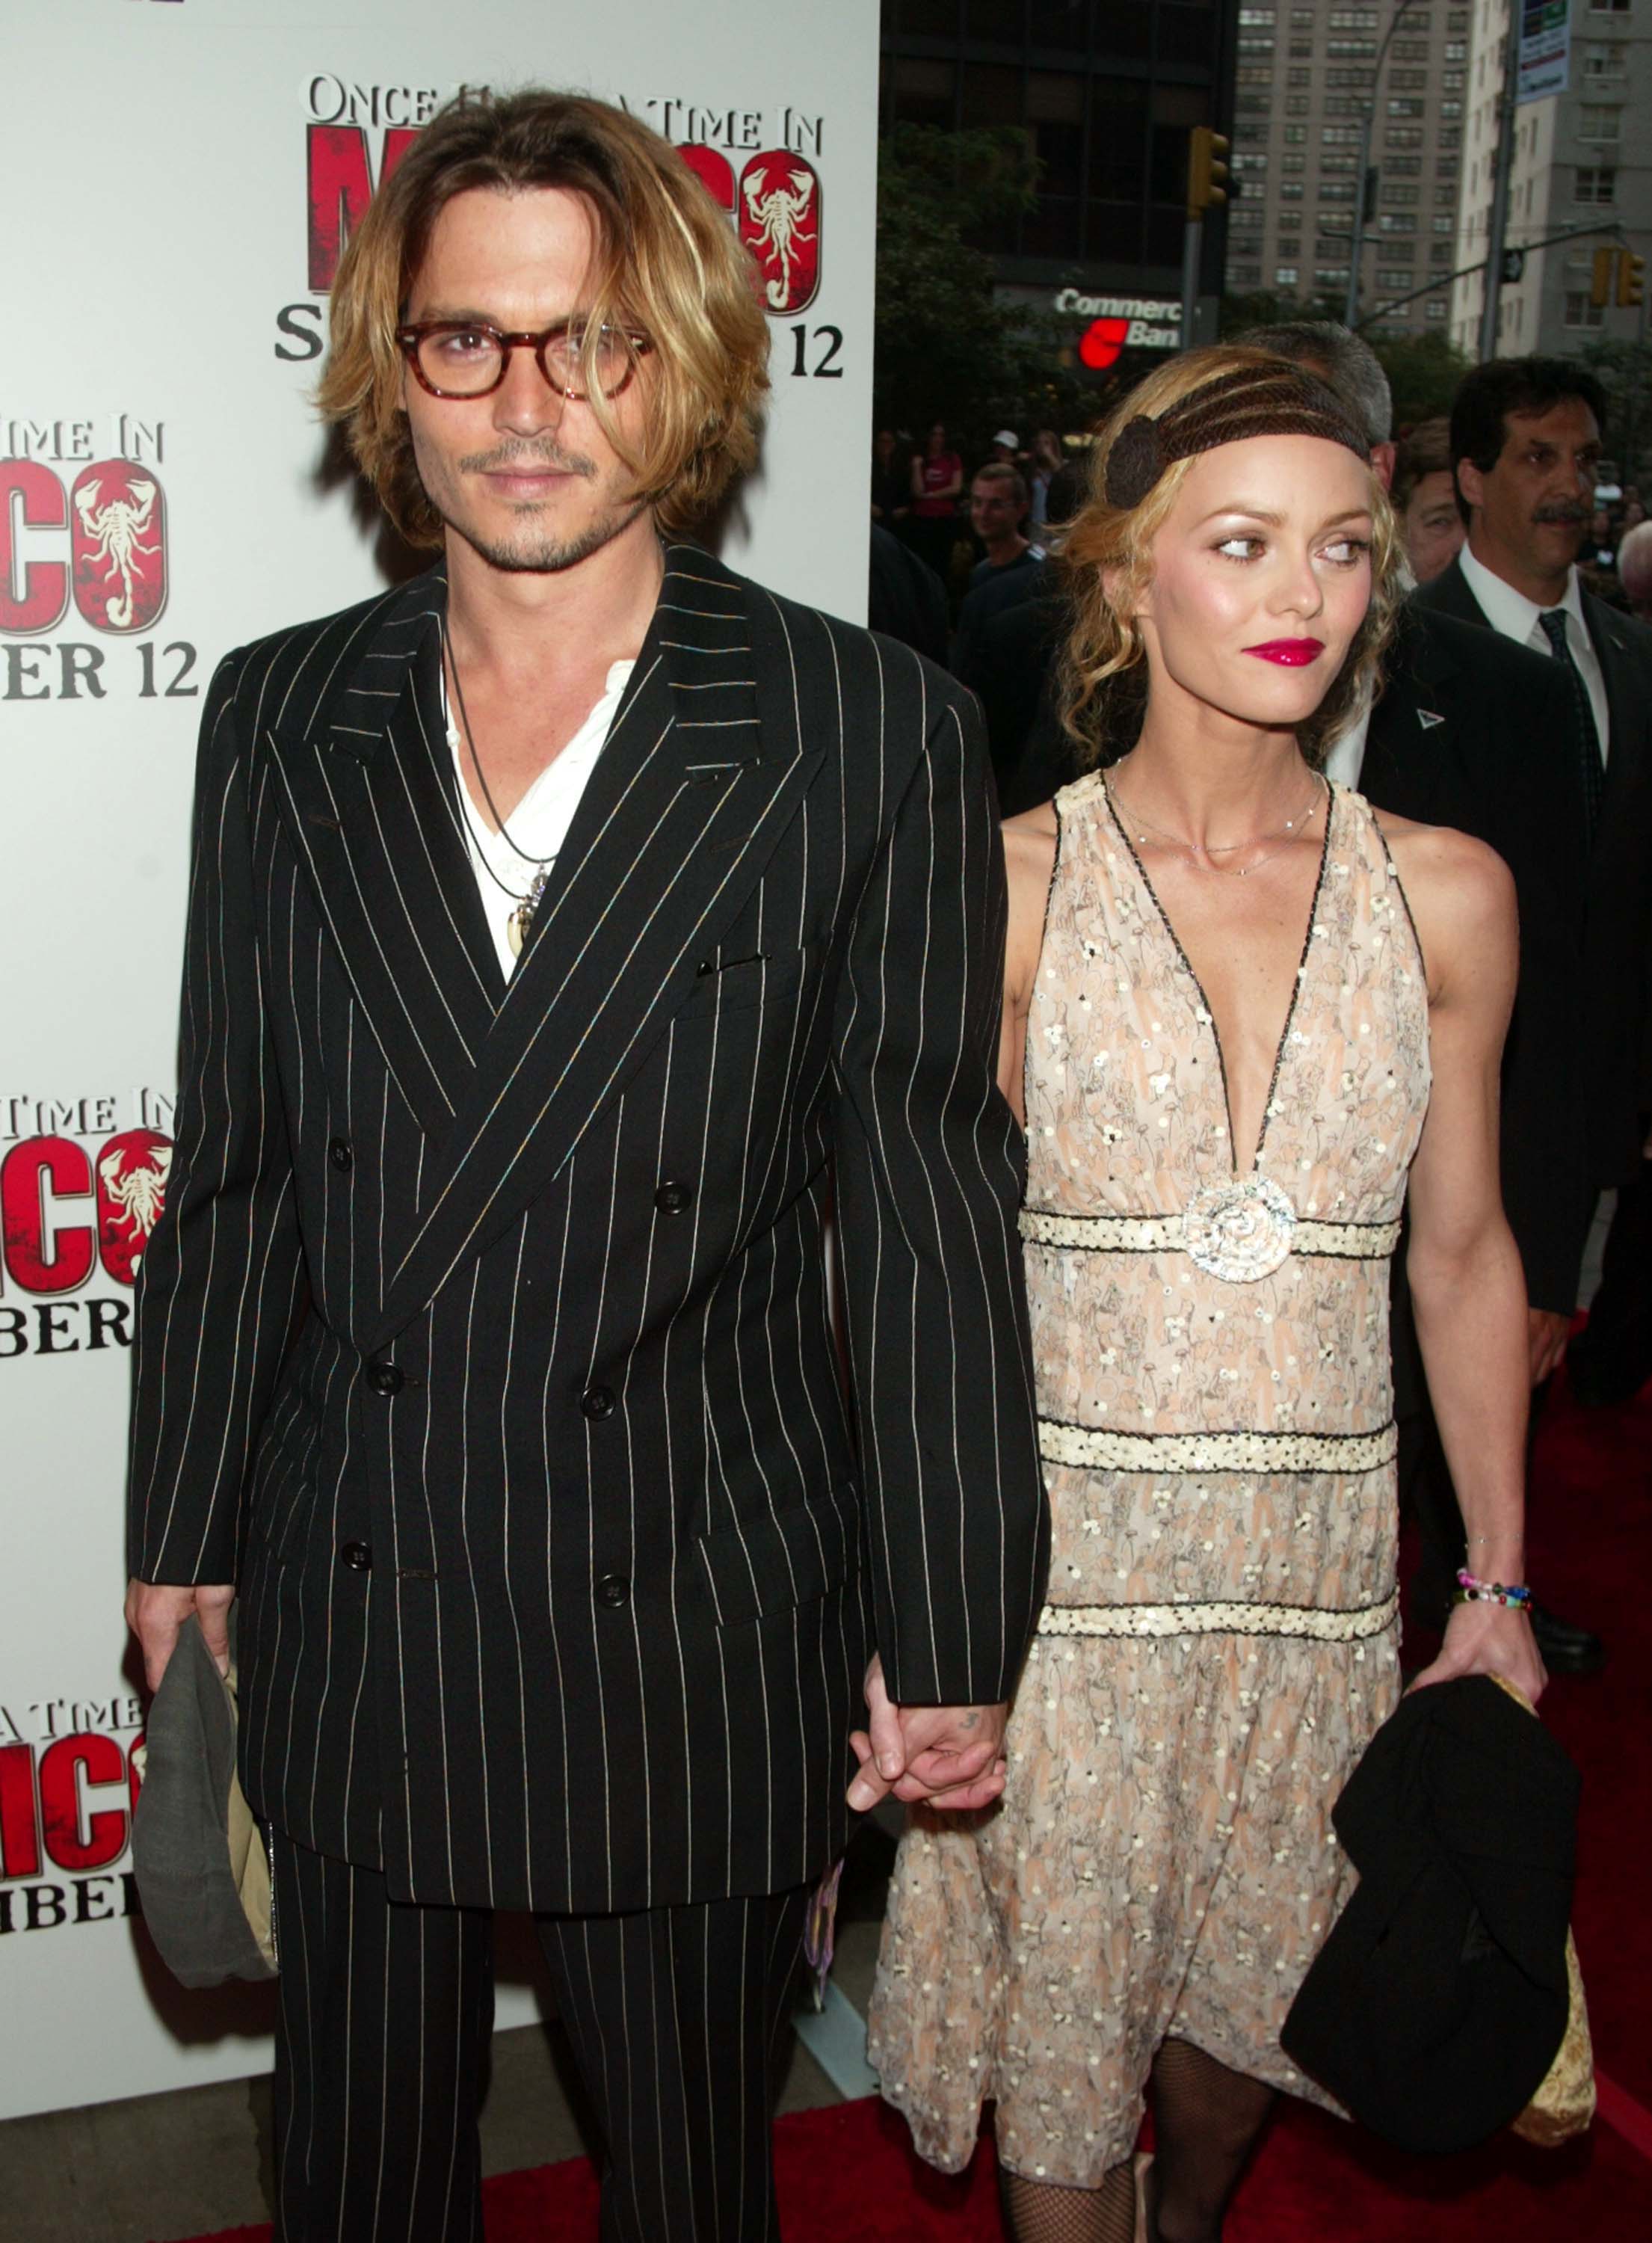 Johnny Depp and Vanessa Paradis at the premiere for "Once Upon a Time in Mexico" in New York City, 2003 | Source: Getty Images